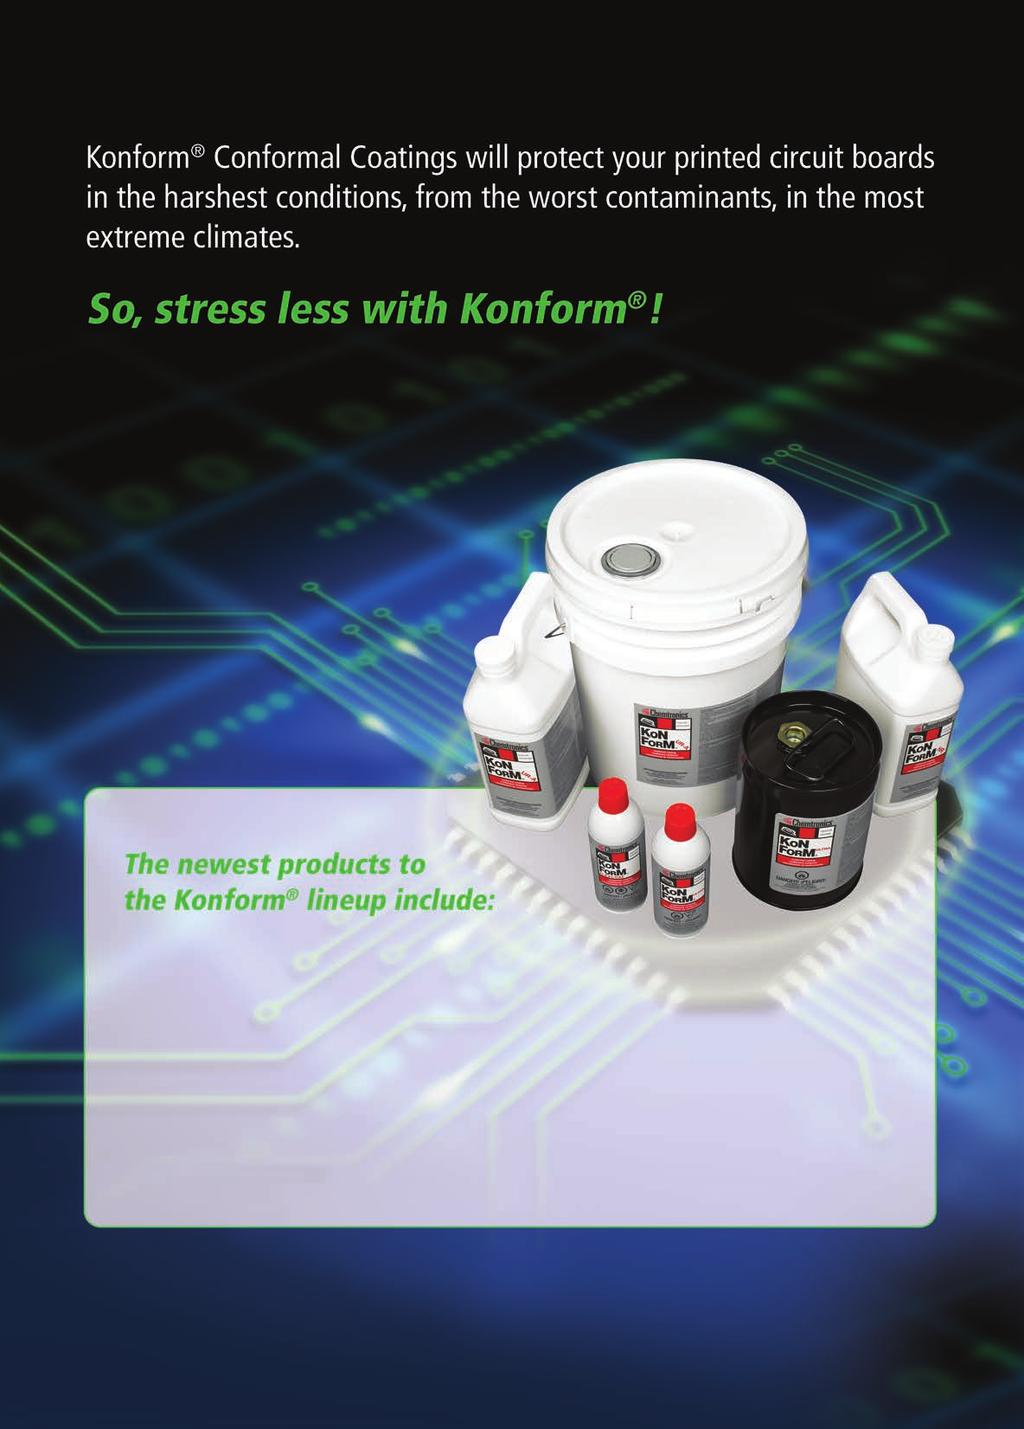 NEW Konform Flexcoat The exceptionally flexible, silicone free coating engineered for superior vibrational protection Konform Ultra The ultra-fast drying acrylic coating engineered for superior